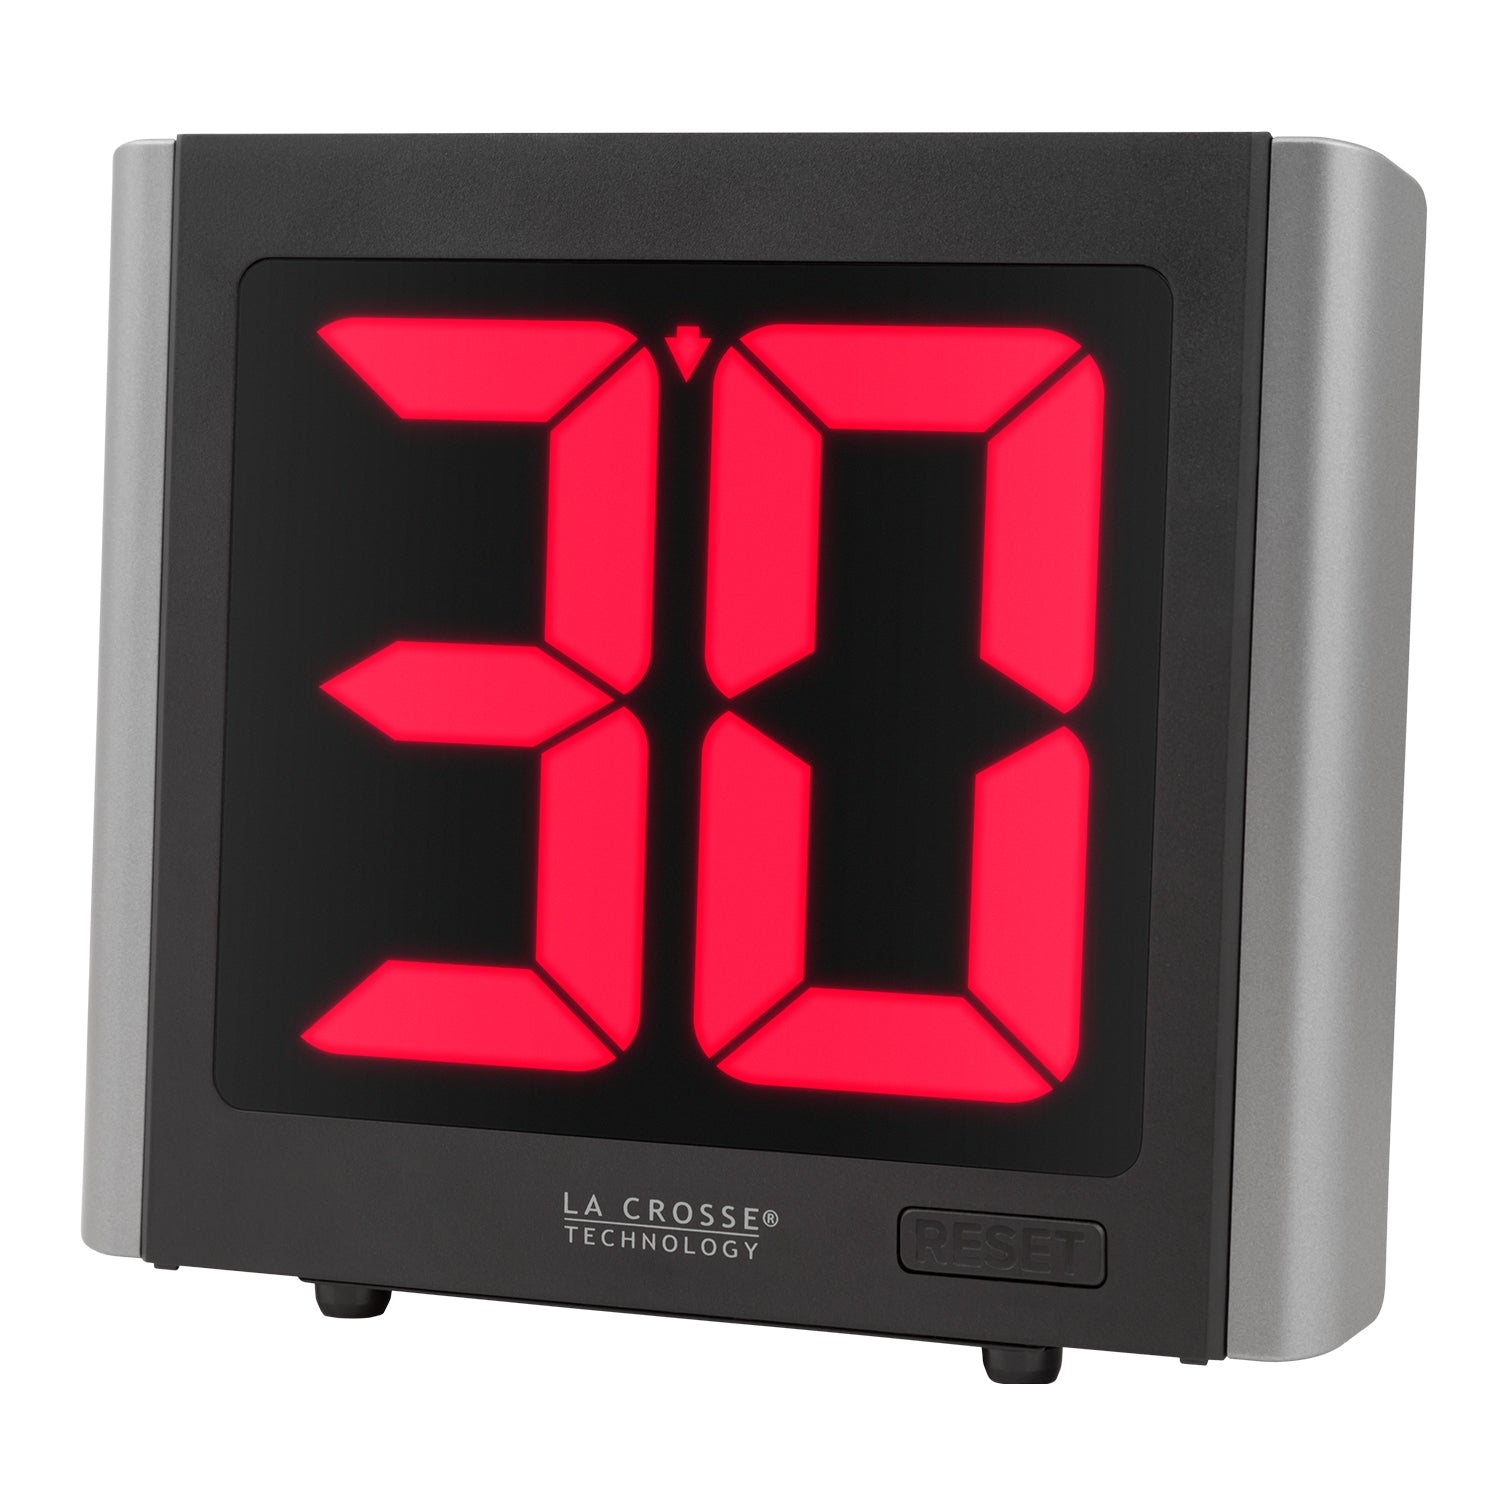 Production Line TAKT Countdown LED Timer System for Assembly Lines,  Wireless Controls, Wireless Link – Customized Digital LED Timers, Counters,  Clocks & Number Displays